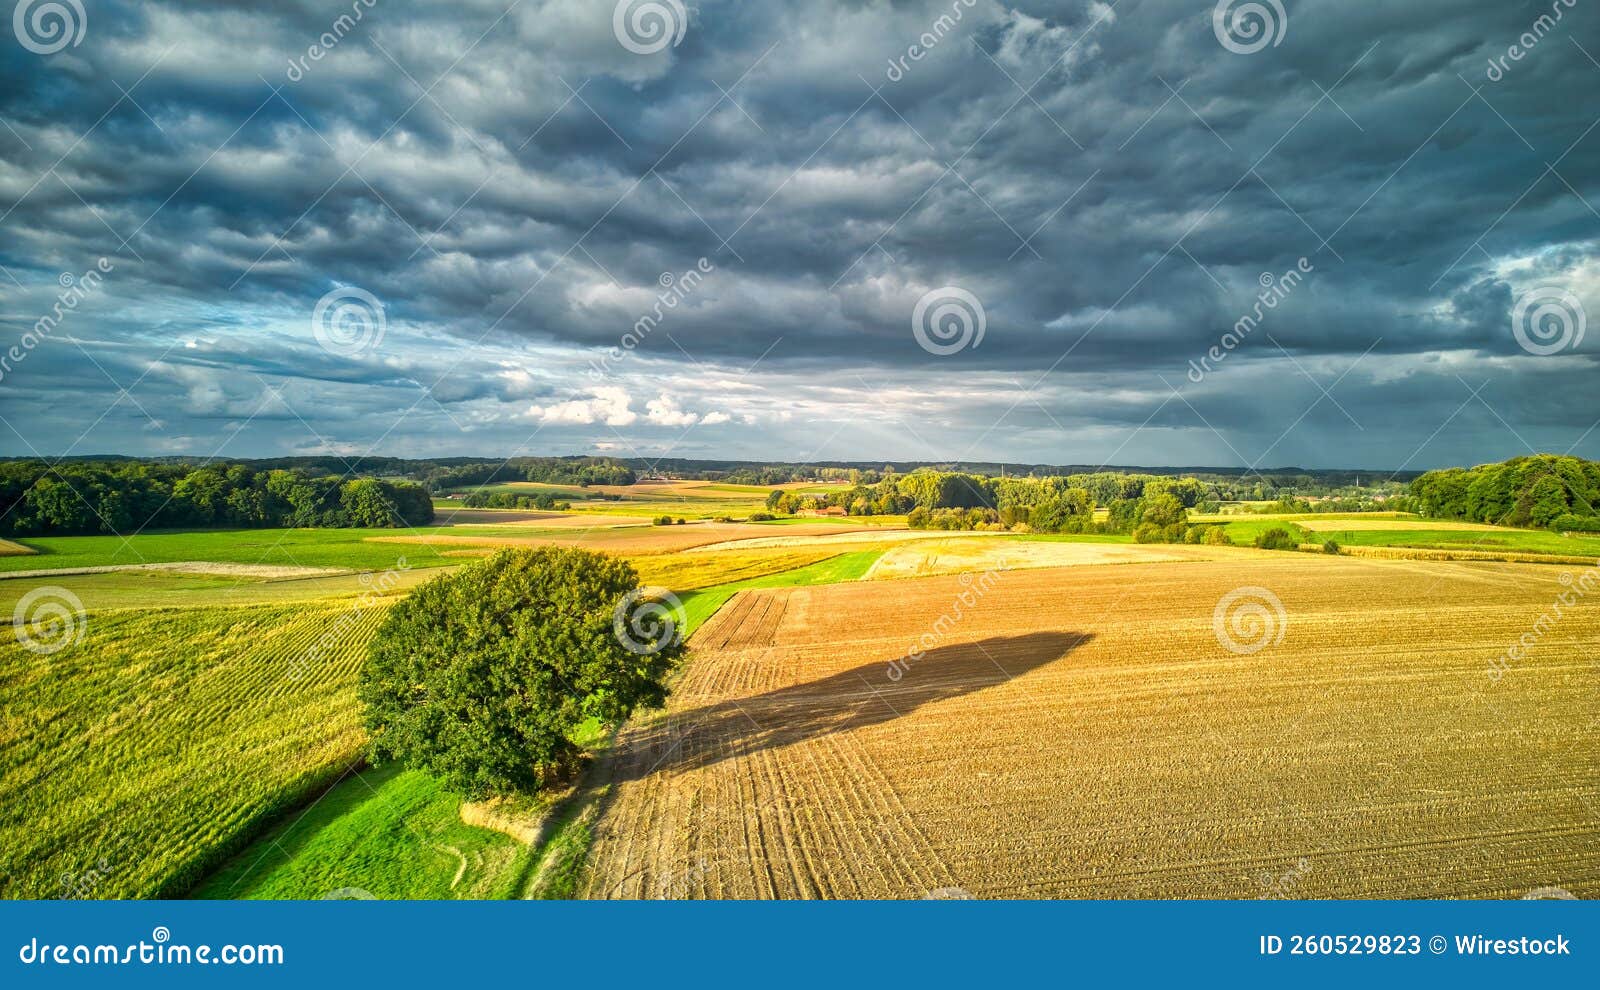 Aerial View Of Greenery Field Surrounded By Dense Trees Stock Image